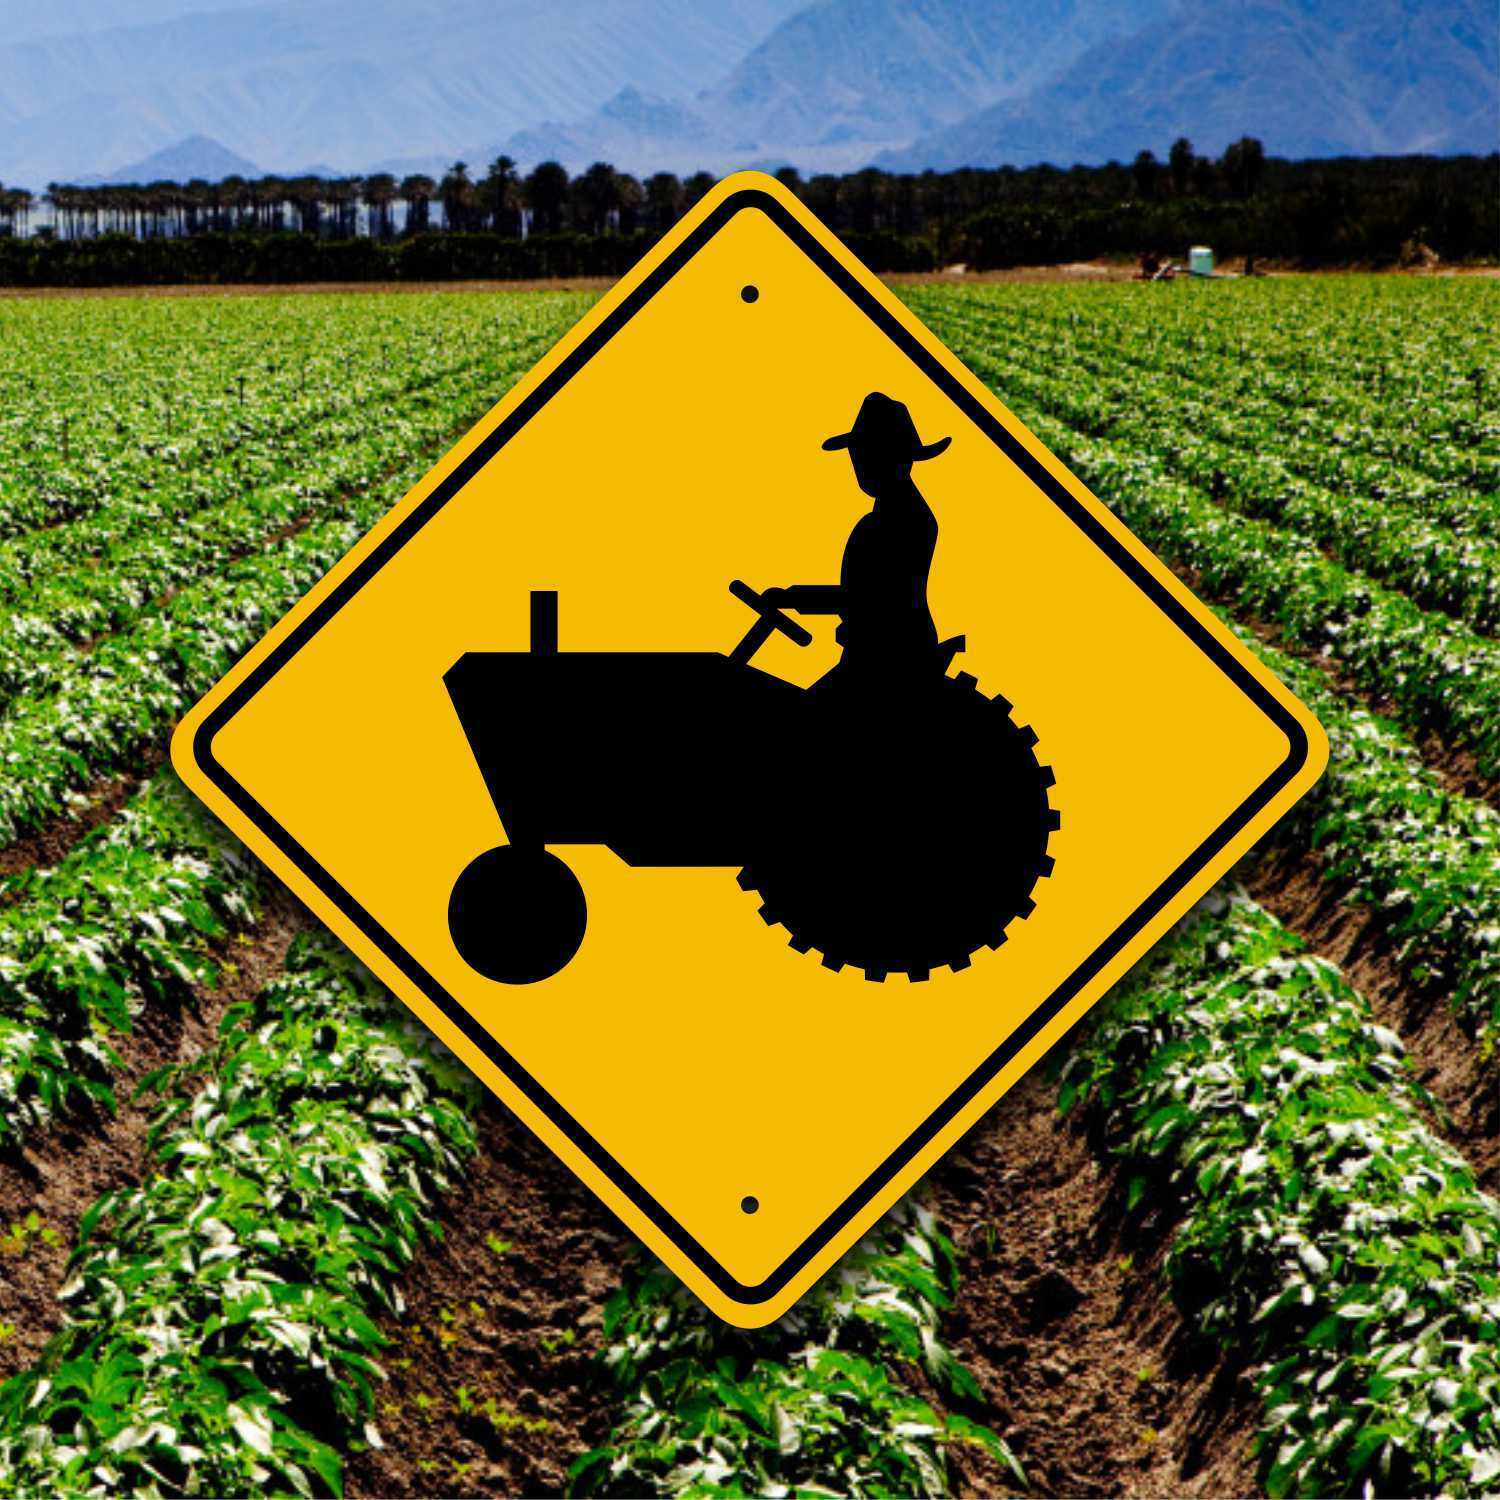 TRACTOR CROSSING SIGN  - Farm Safety Plaque - Country Garden - Riding Lawn Mower